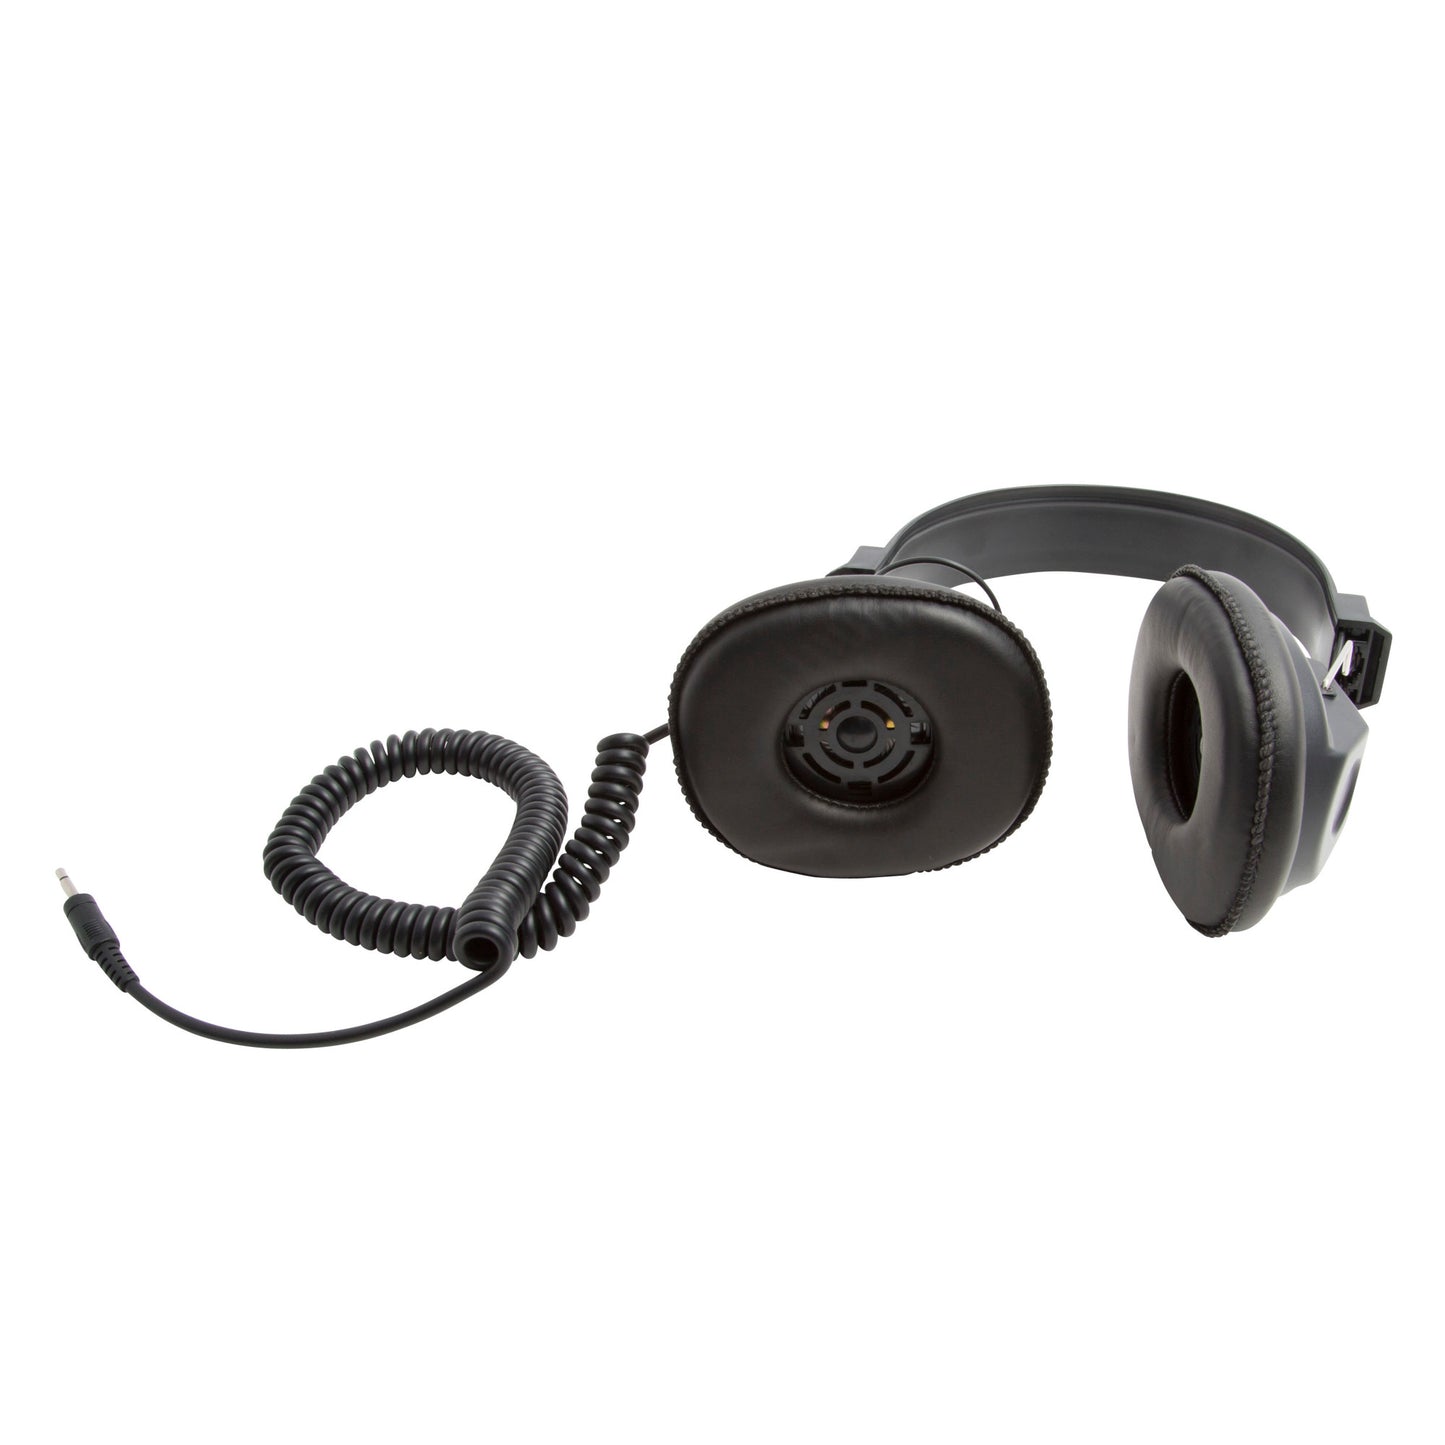 Replacement Headphones for ChassisEAR, EngineEAR I and EngineEAR II